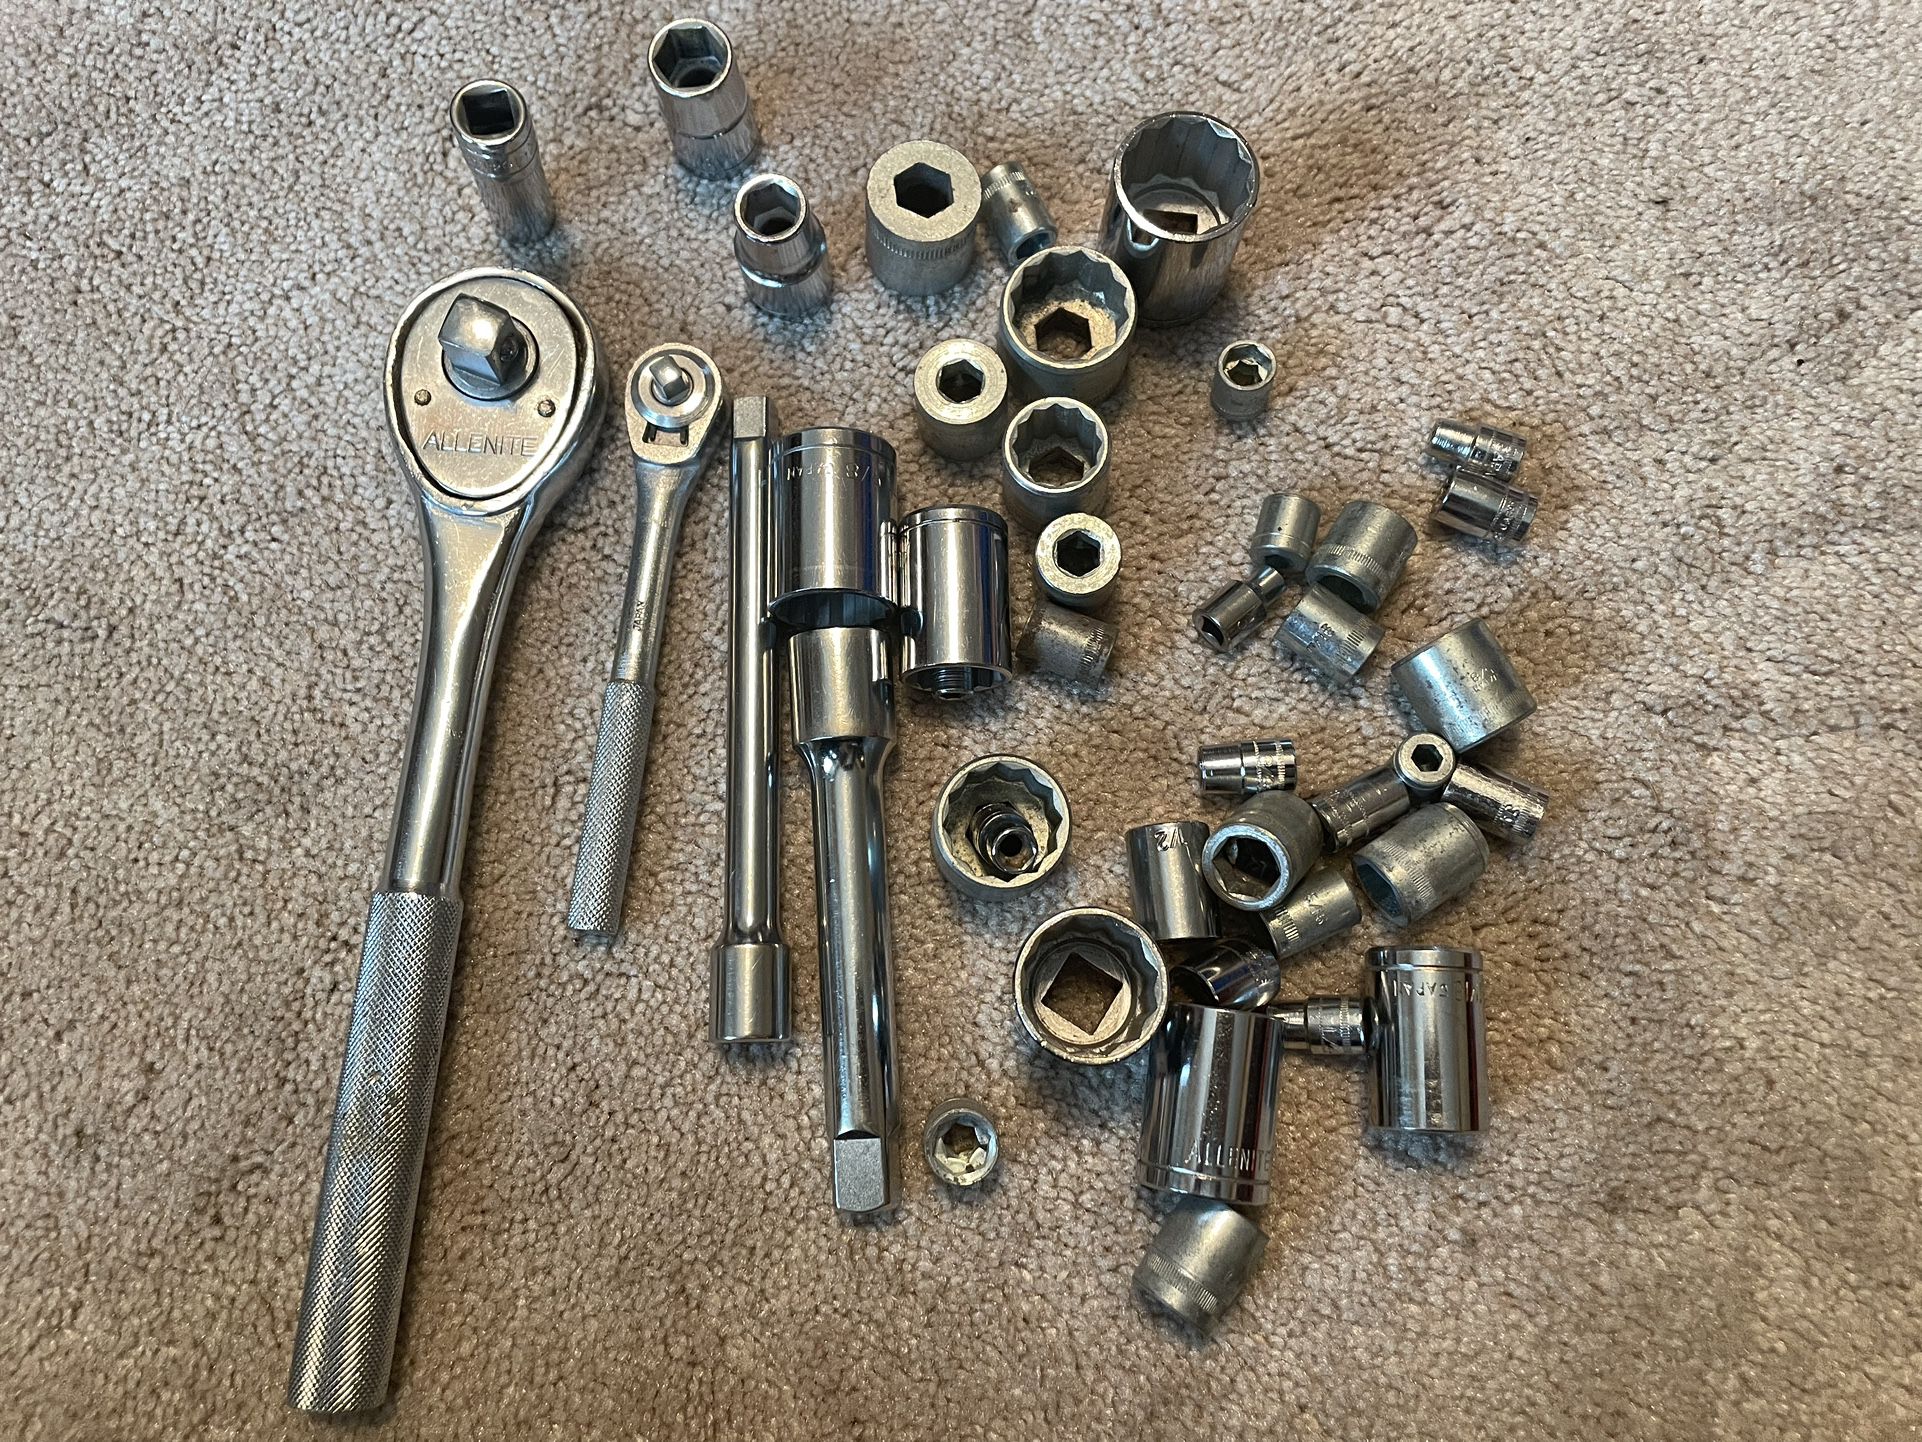 Socket wrenches and sockets